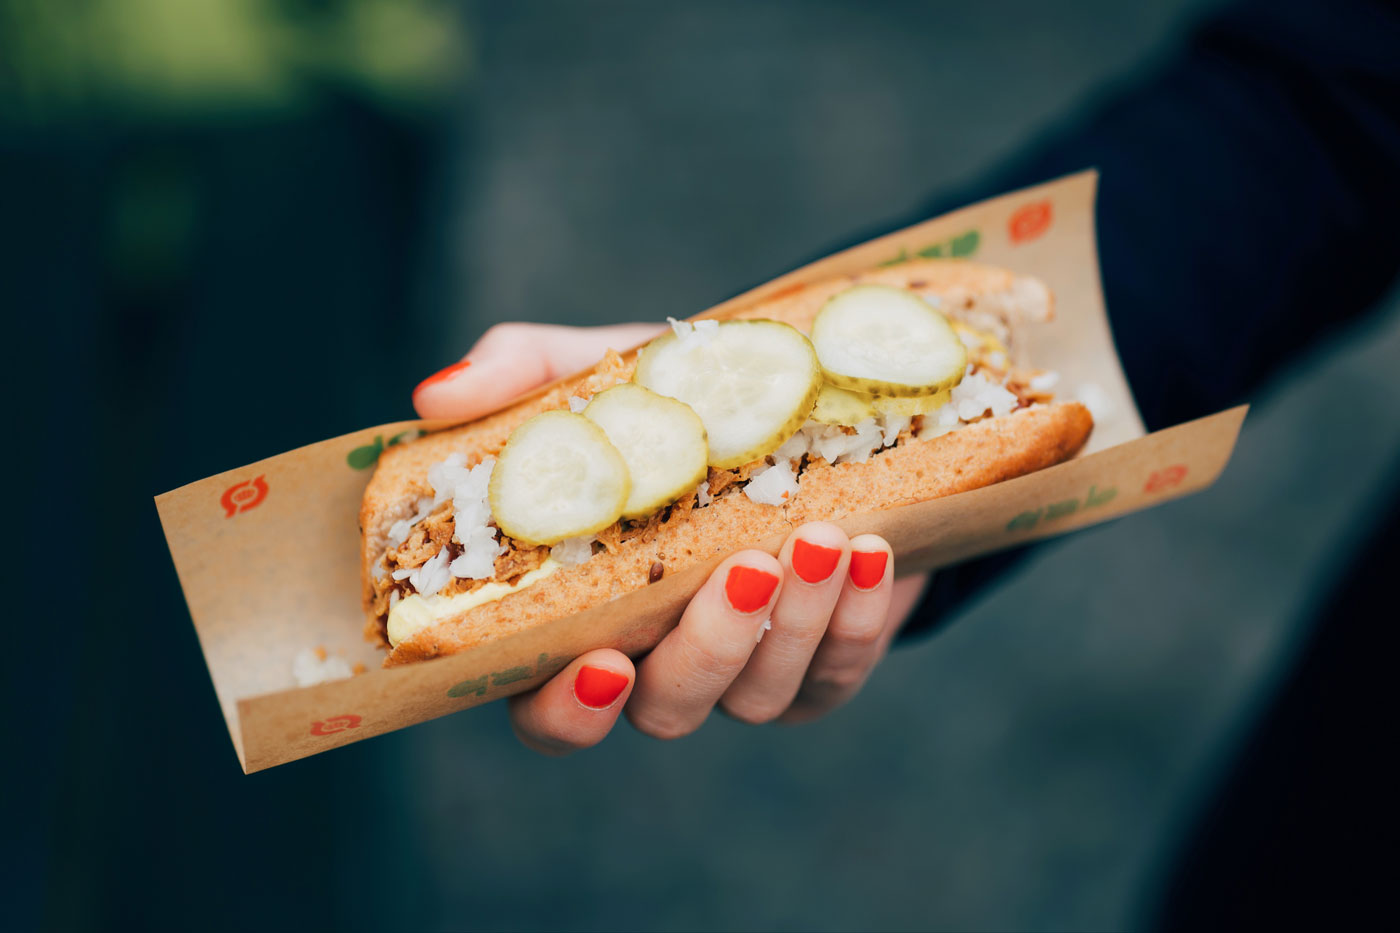 Celebrate National Hot Dog Day the Healthy Way!